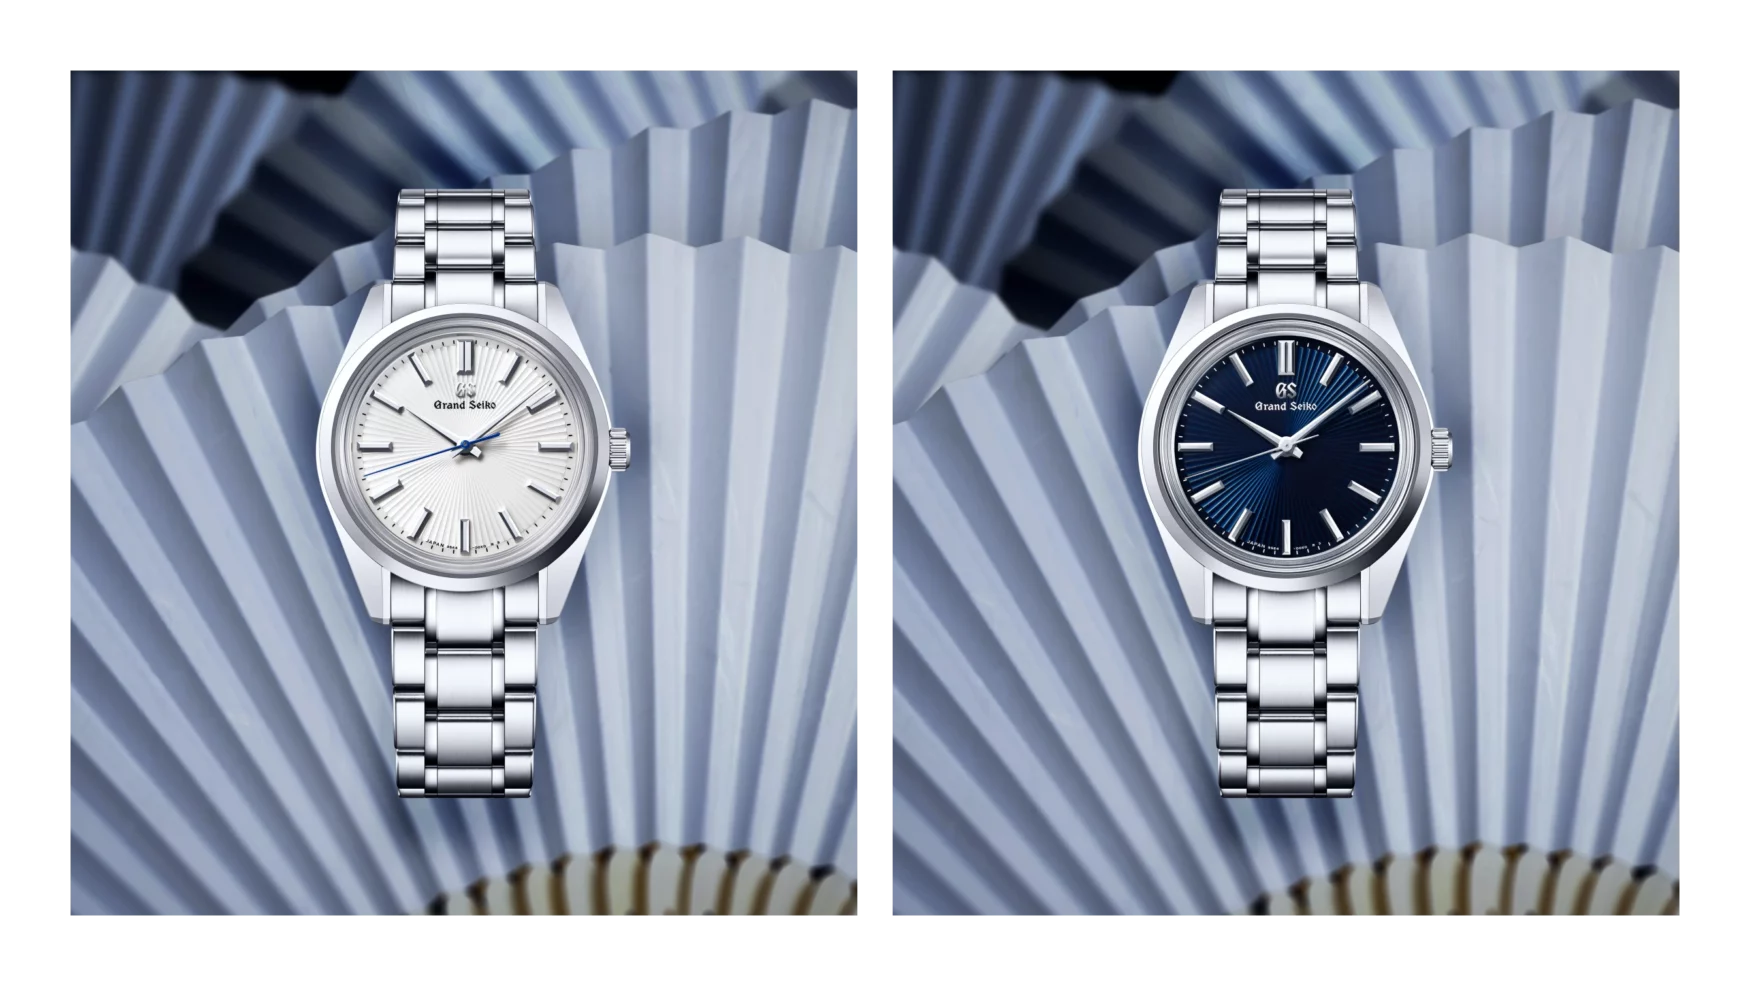 The Grand Seiko SBGW297 & SBGW299 bring back bracelets to 36.5mm 44GS cases